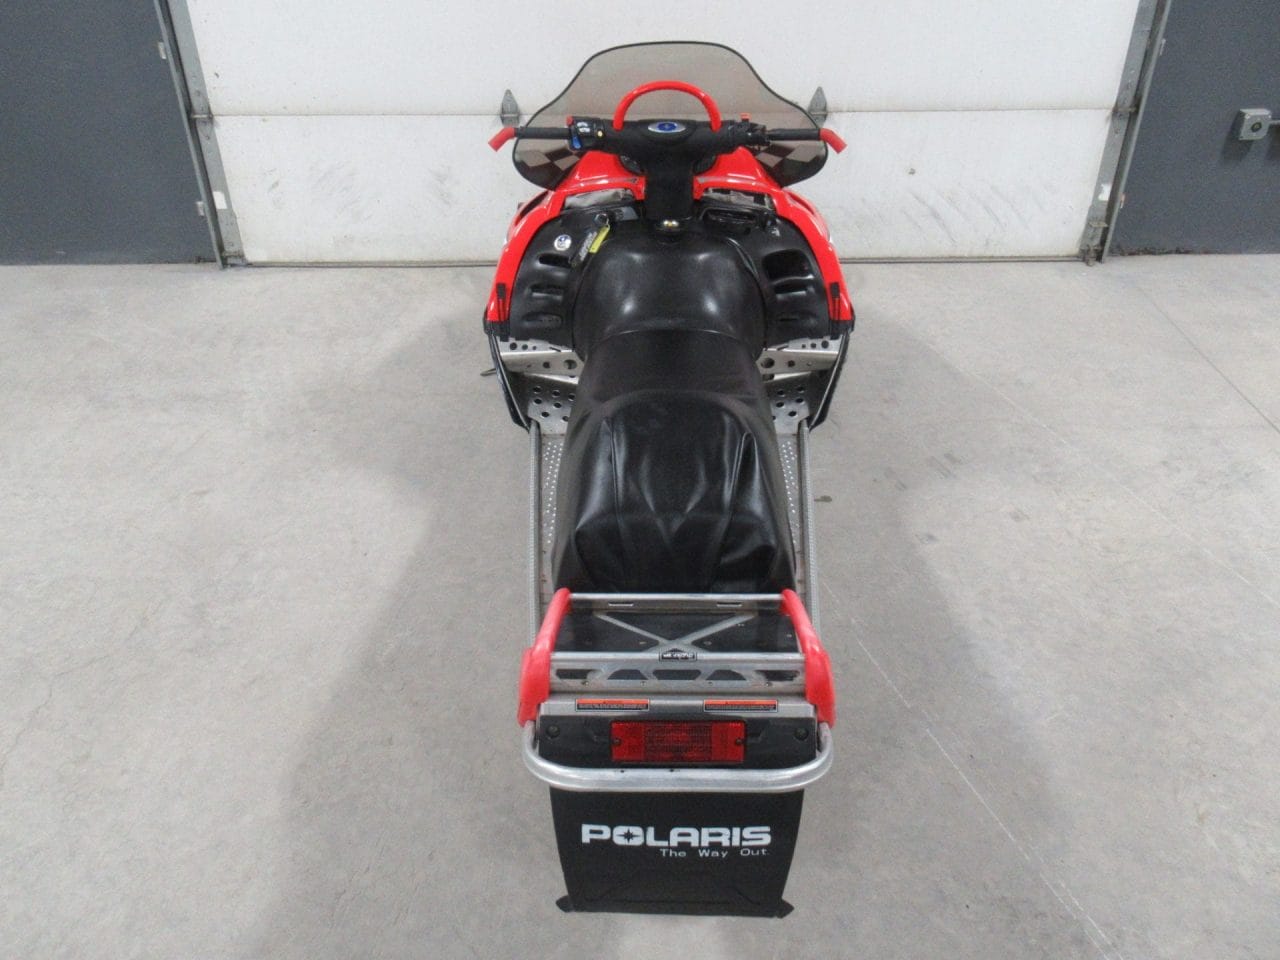 2005 Polaris Trail RMK 550 136” * Fan Cooled & Electric Start * New Top End